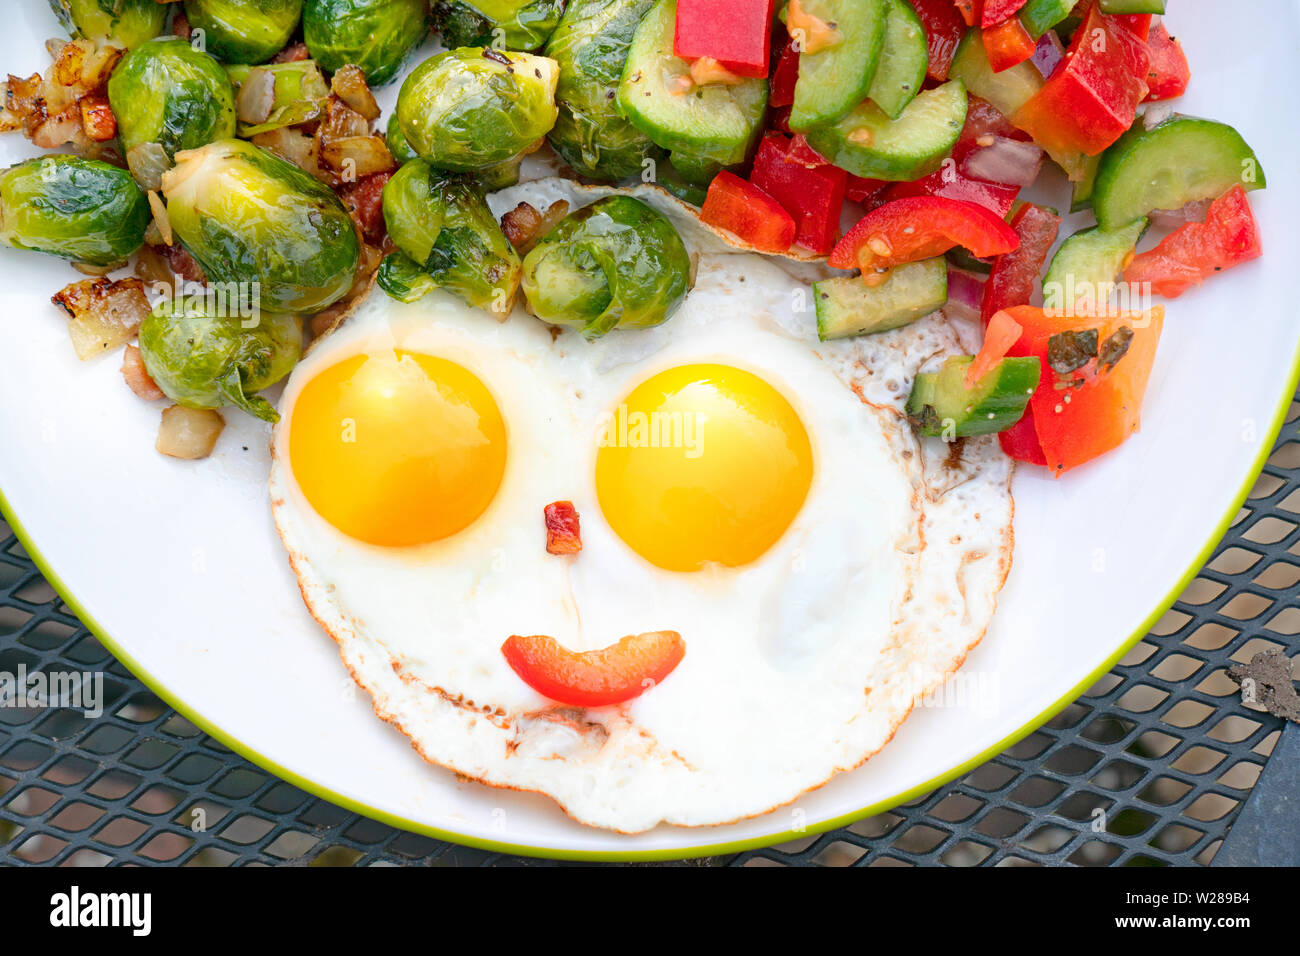 Healthy breakfast, two eggs, a sald,  and brussel sprouts Stock Photo